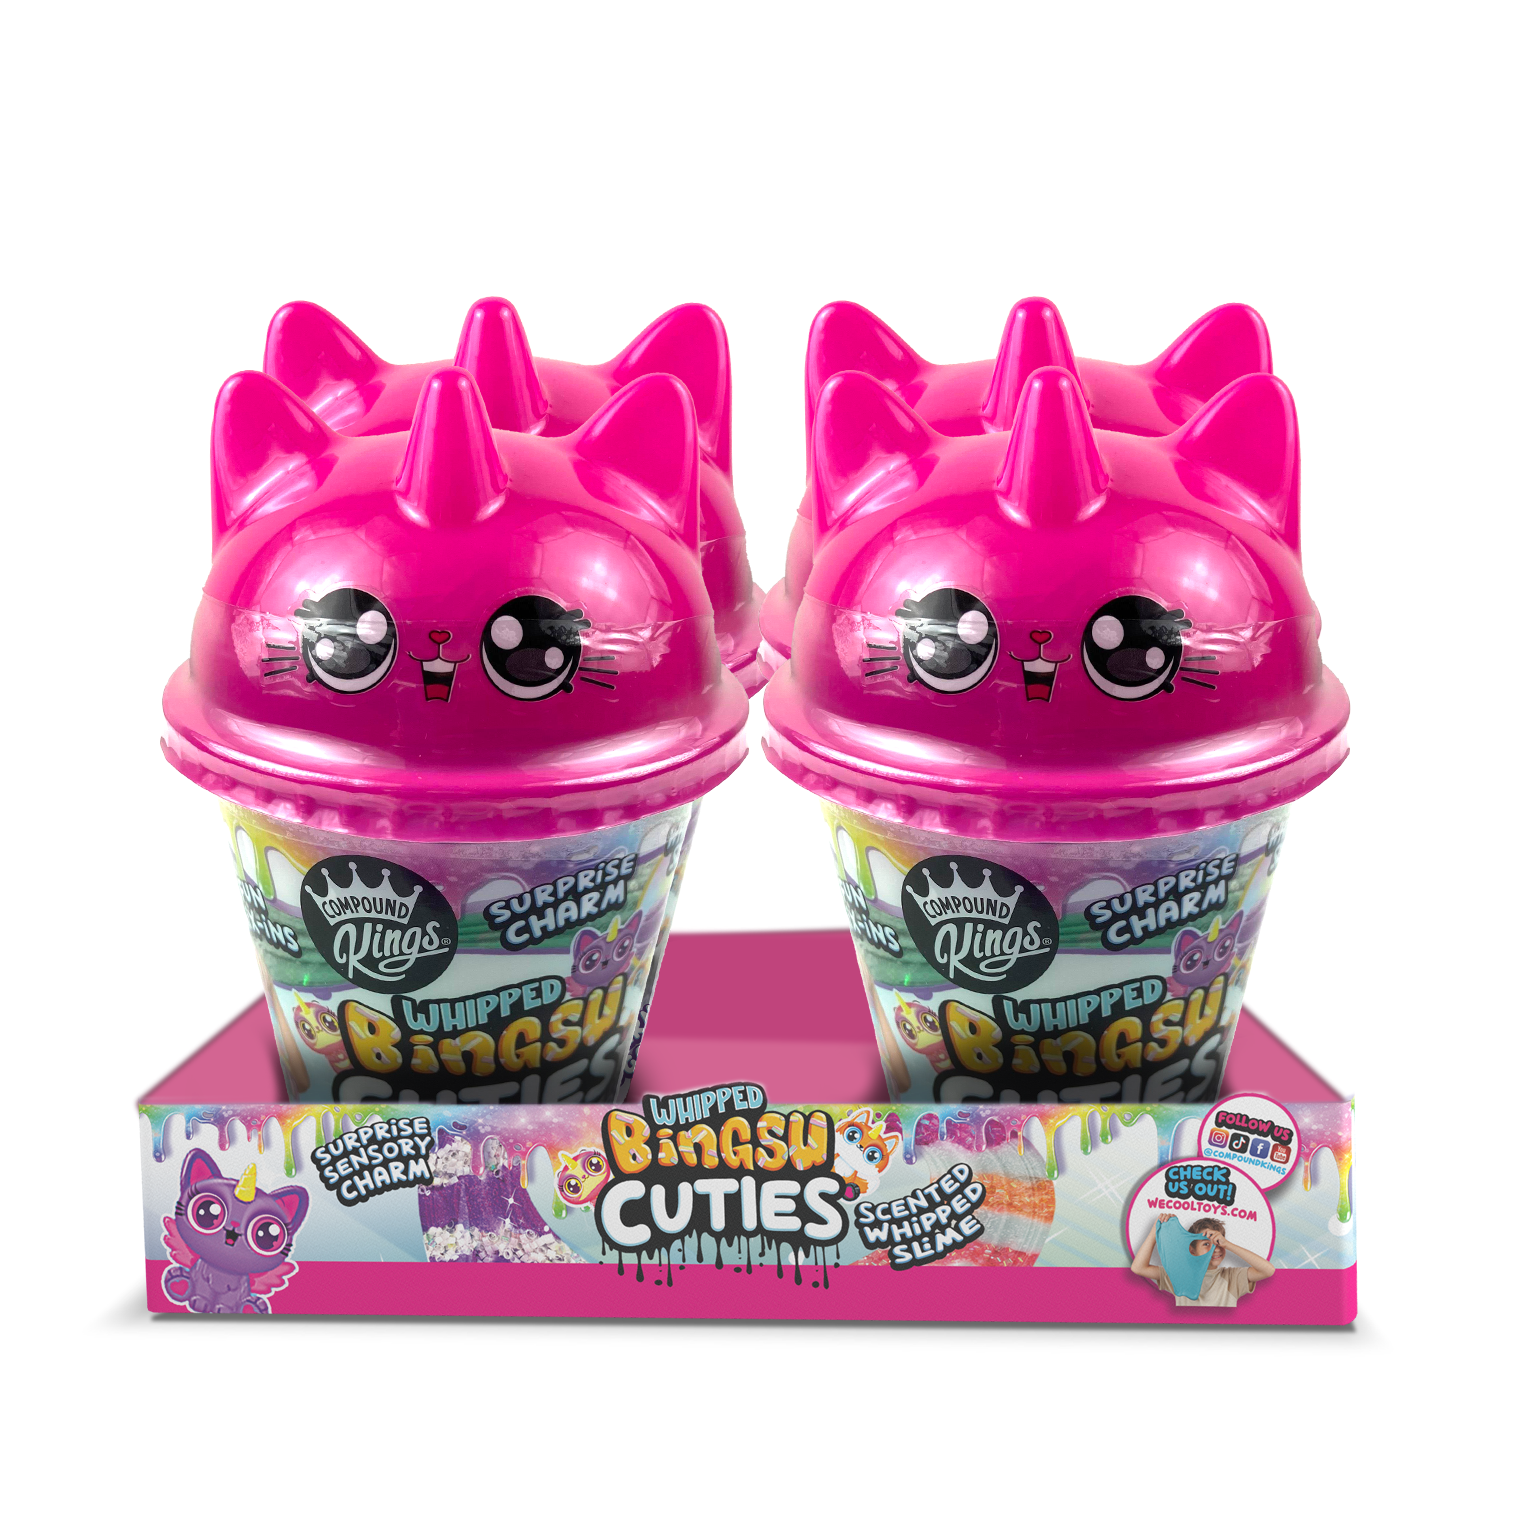 Compound Kings Whipped Bingsu Unicuties, Textured Slime for Ages 4+Both Boys / Girls